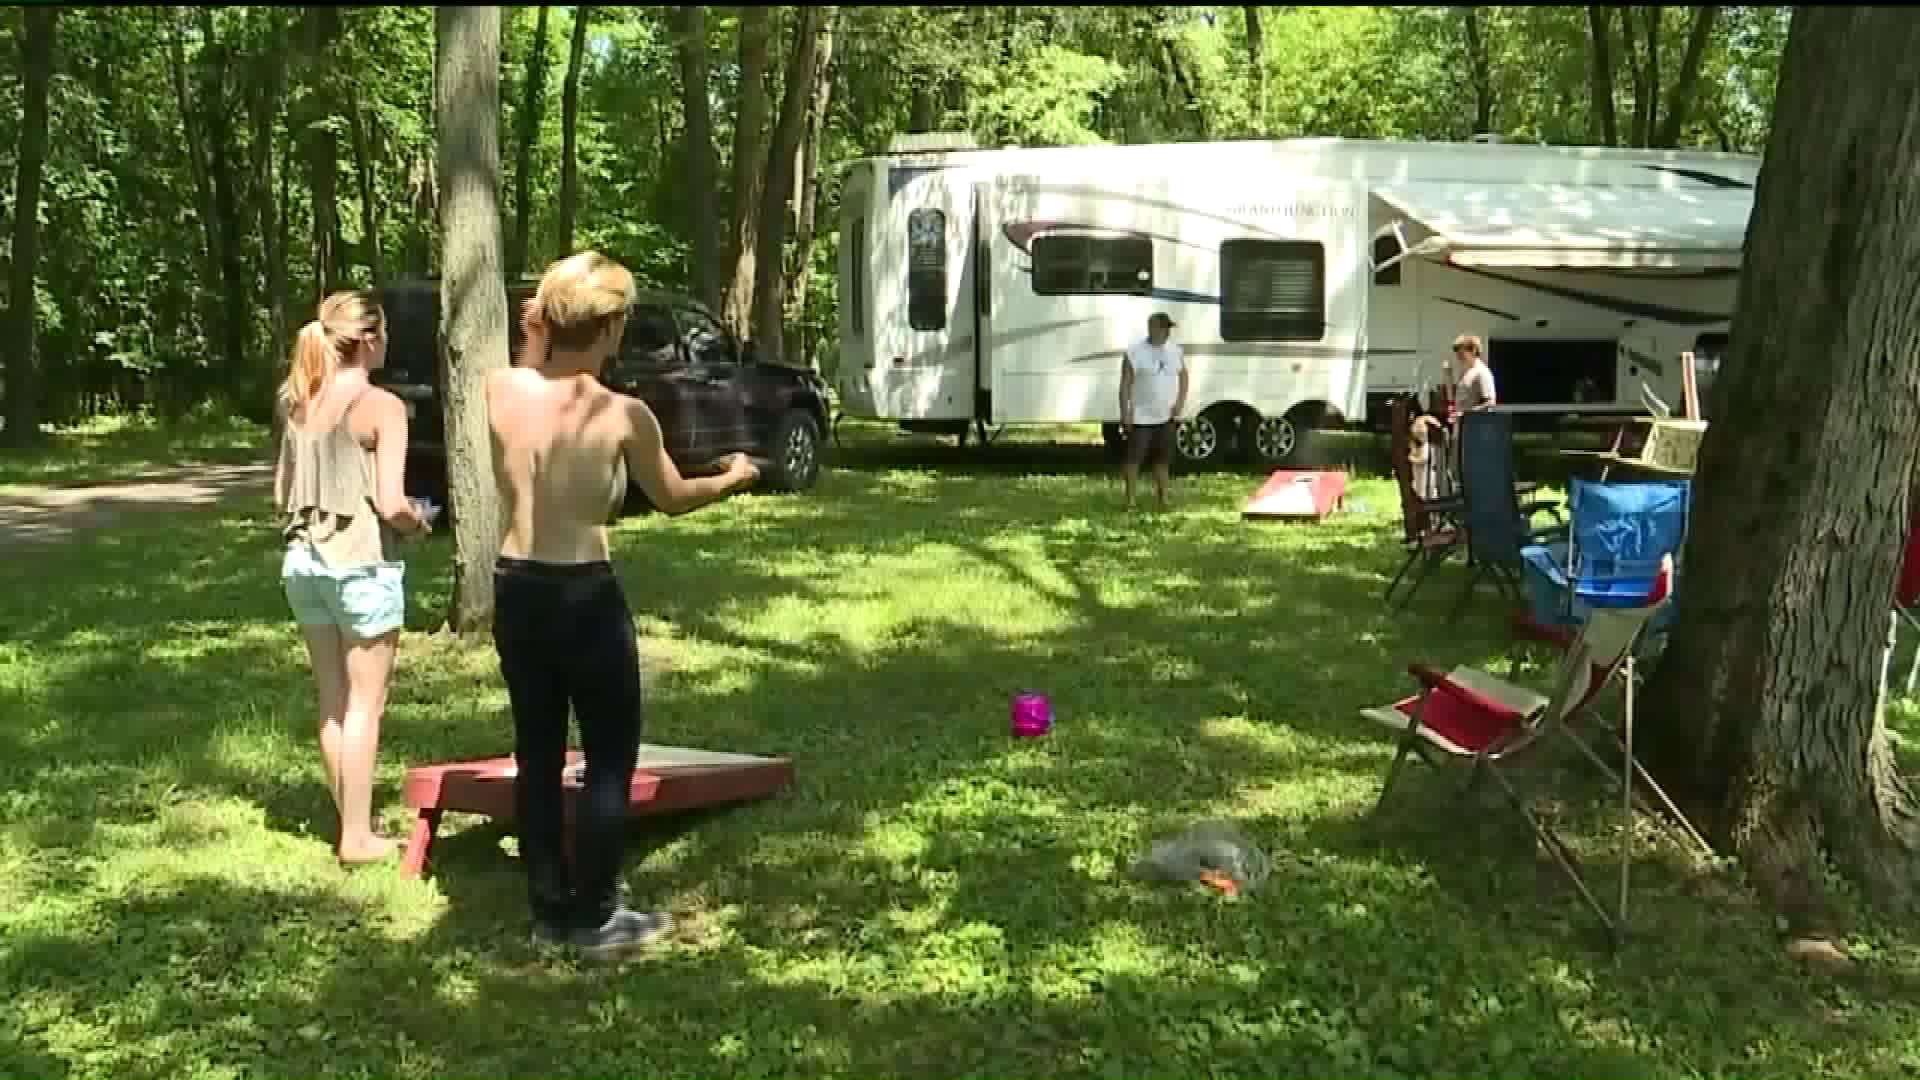 Midweek Holiday Shortens Fourth of July Camping